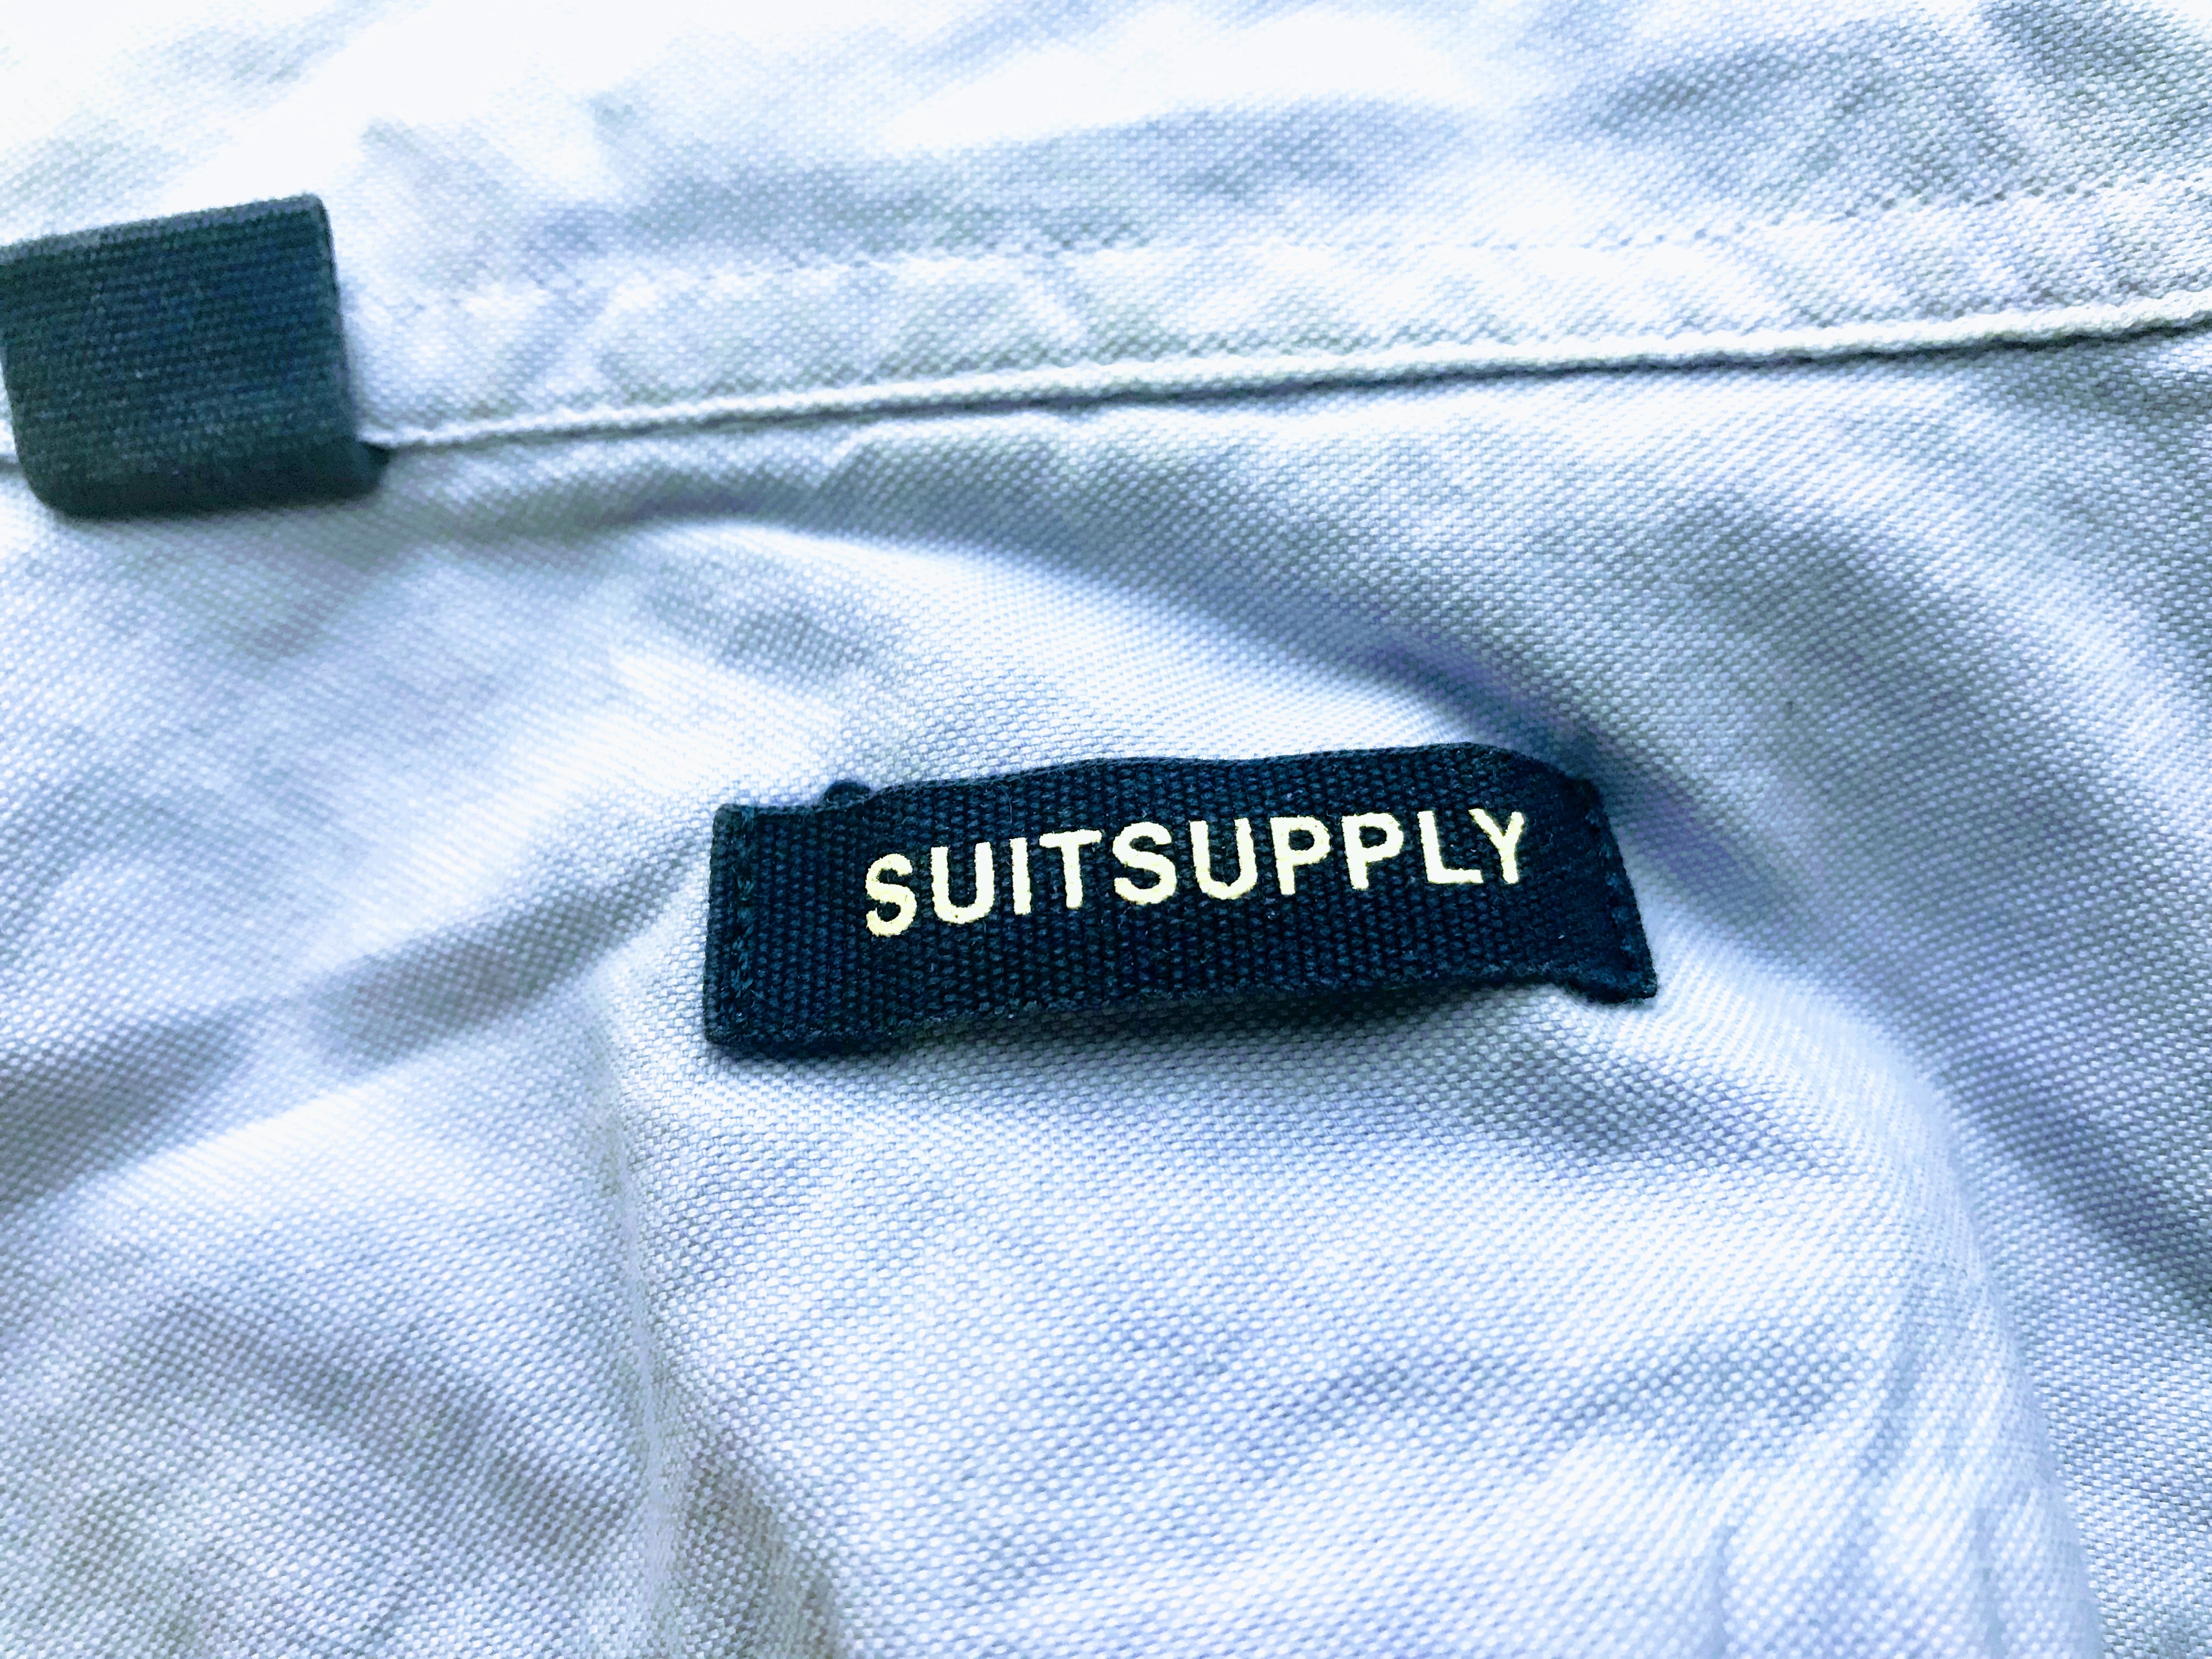 Suitsupply shirt label